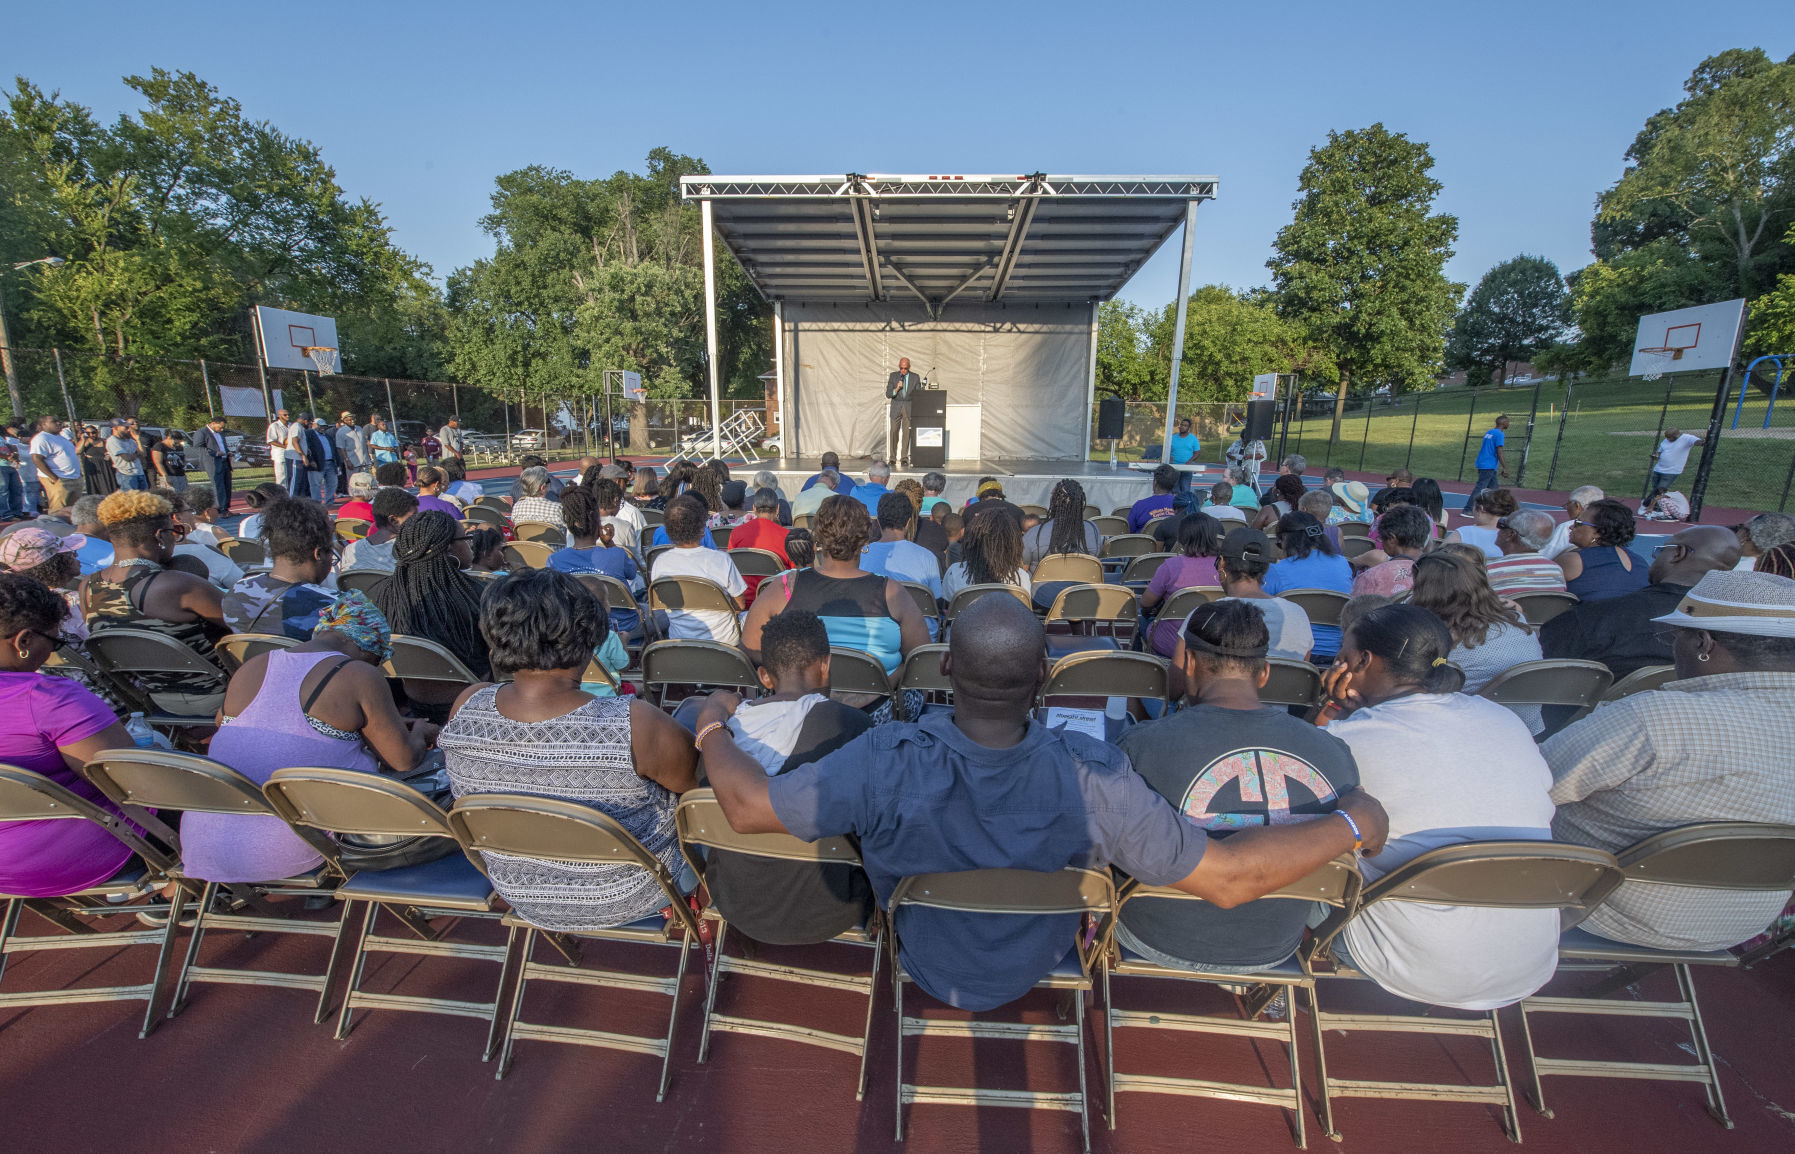 Guns down, prayers up Roanoke leaders implore peace after violence